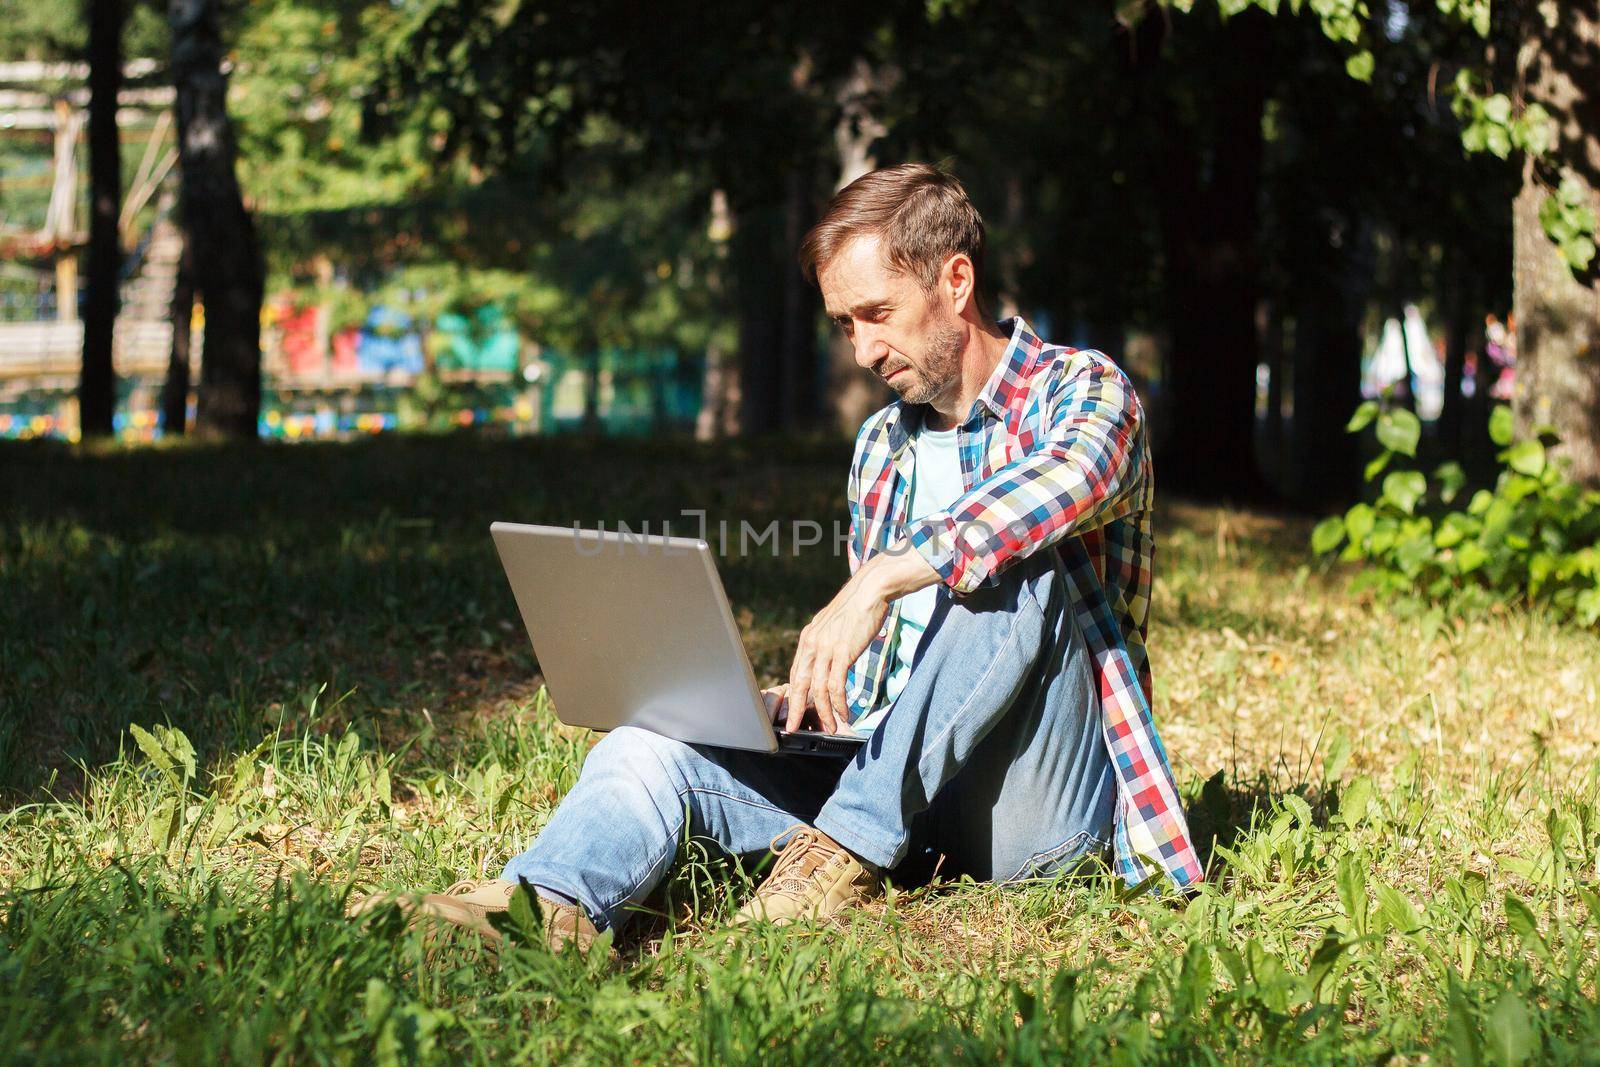 Adult man works on his computer in the park on the lawn.Remote work concept. The writer works remotely, enjoying nature.